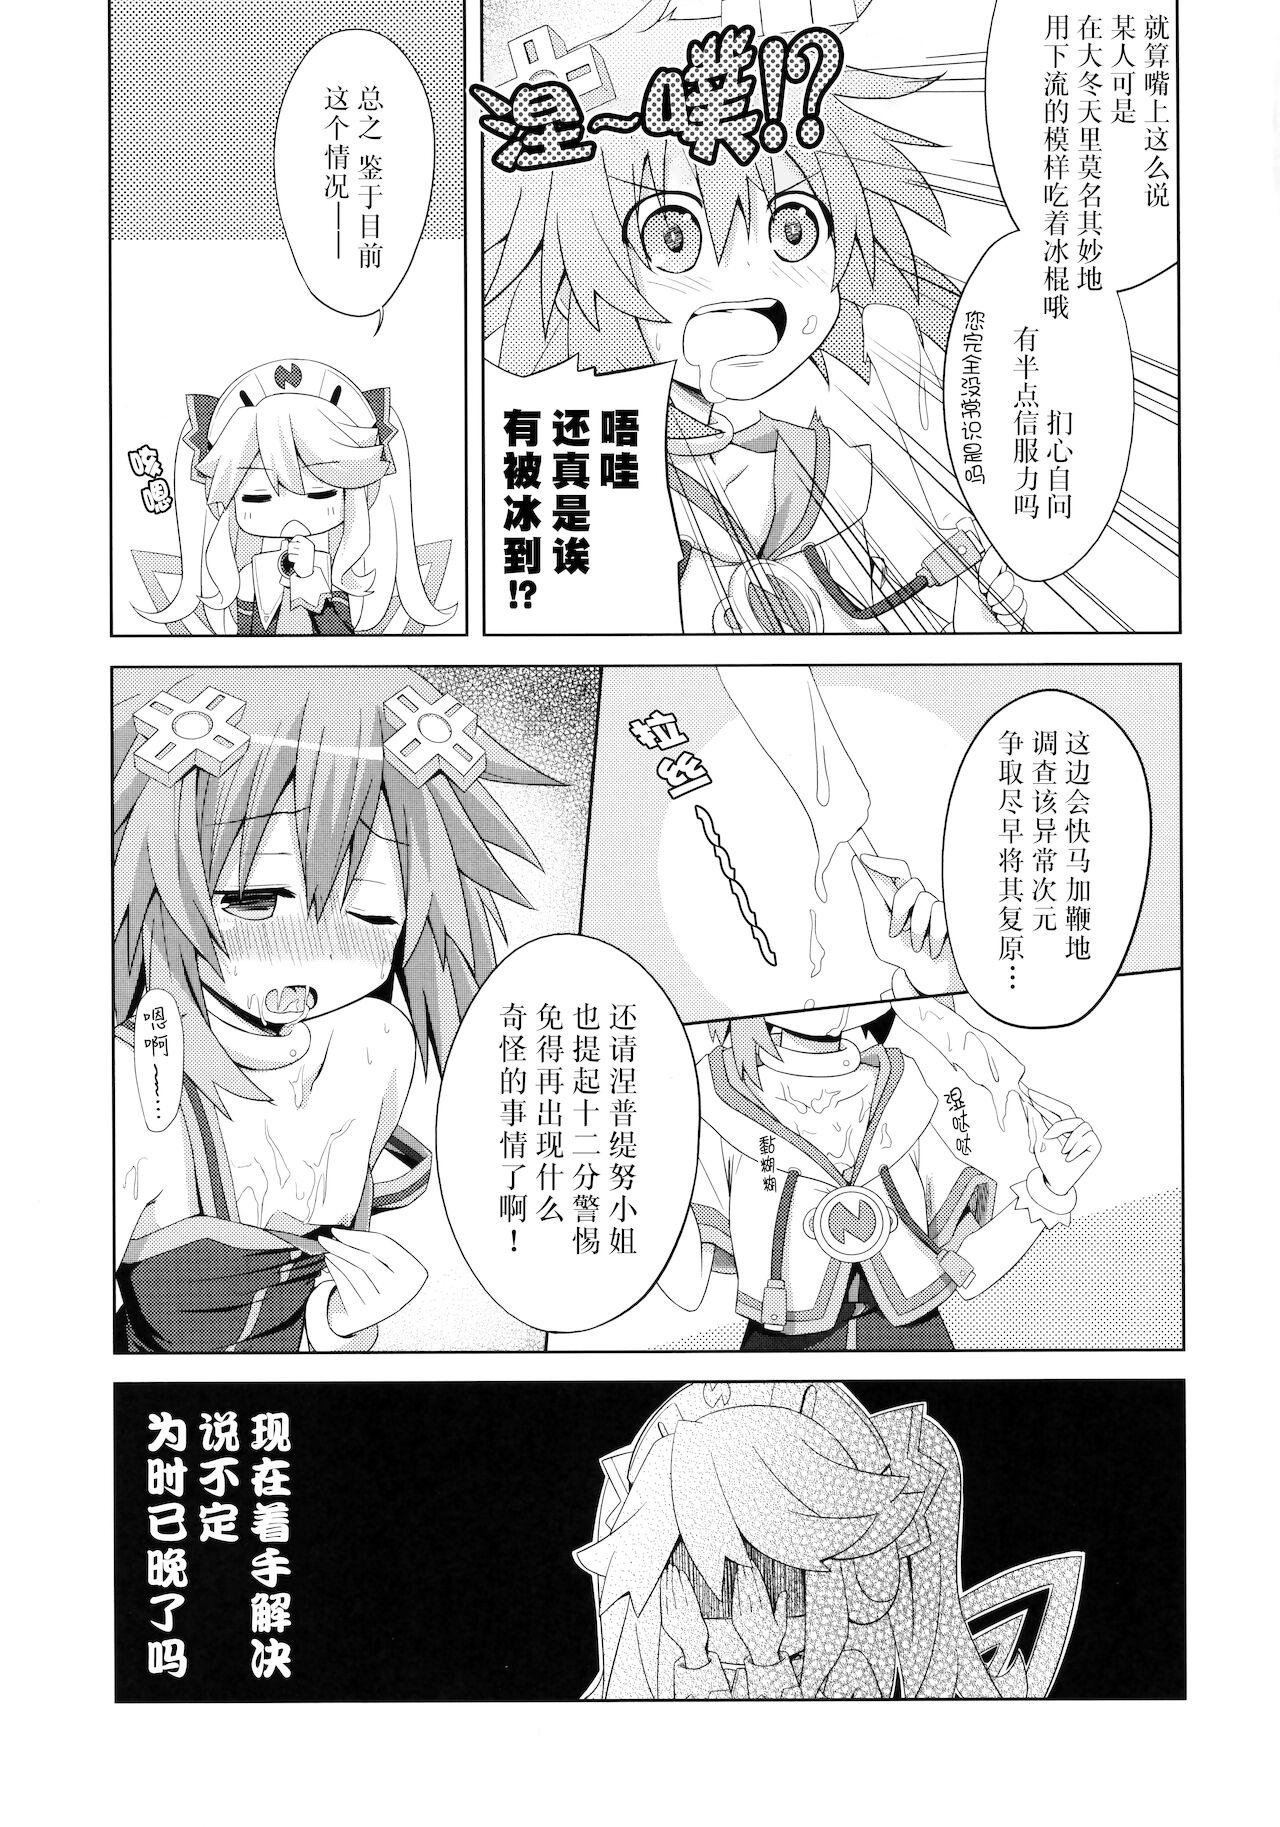 Bucetinha A certain Nepgear was harmed in the making of this doujinshi - Hyperdimension neptunia | choujigen game neptune Tits - Page 6